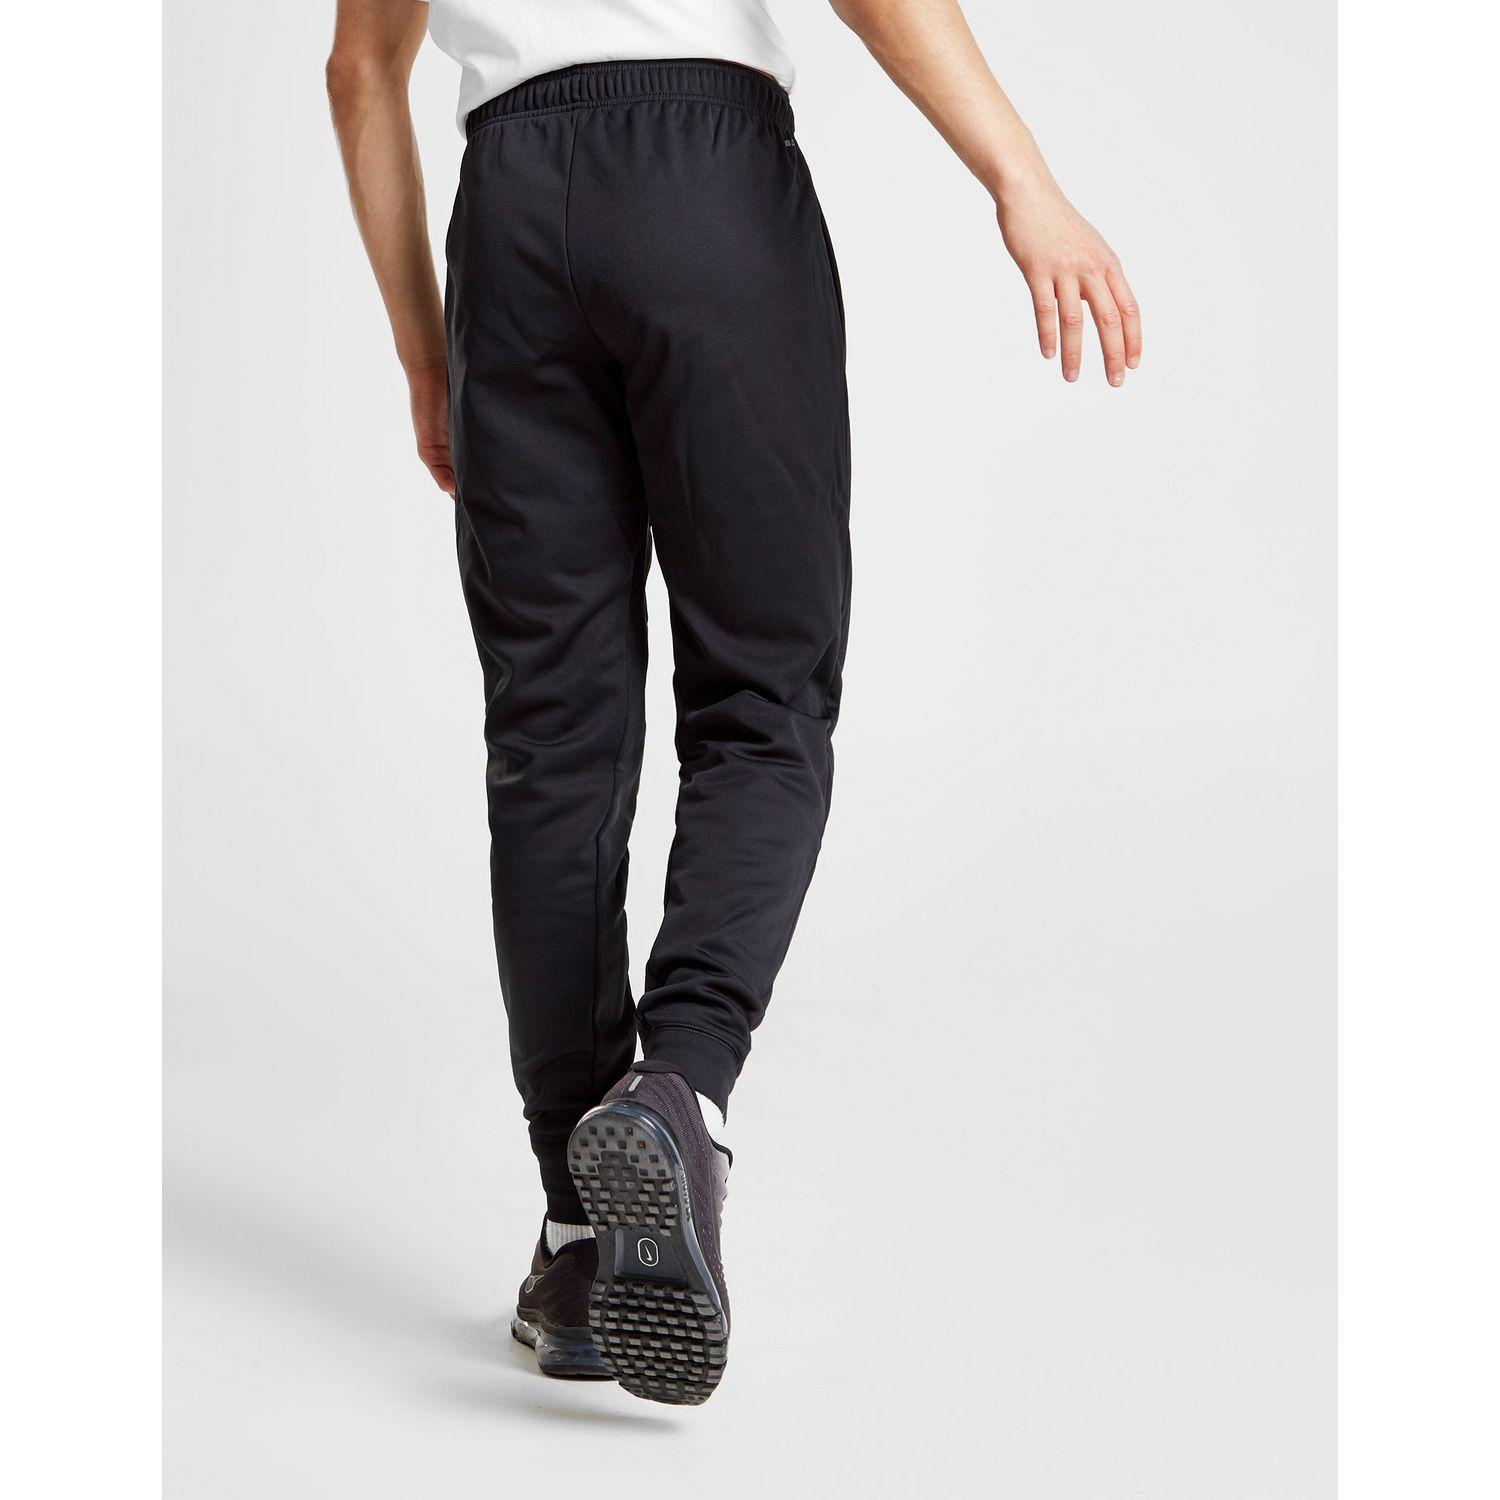 New Balance Synthetic Poly Track Pants in Black for Men - Lyst